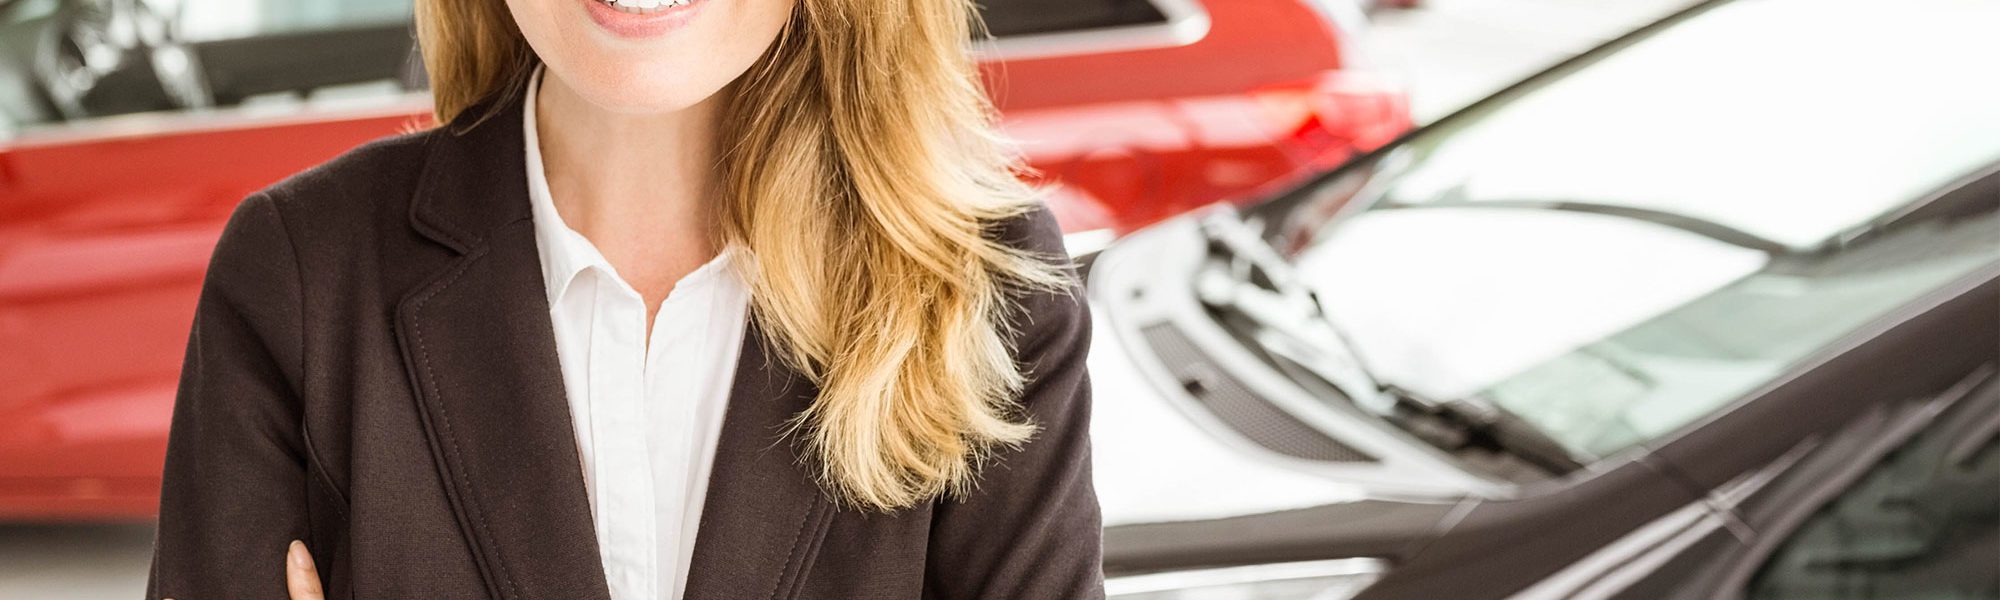 Smiling saleswoman standing with arms crossed in car showroom